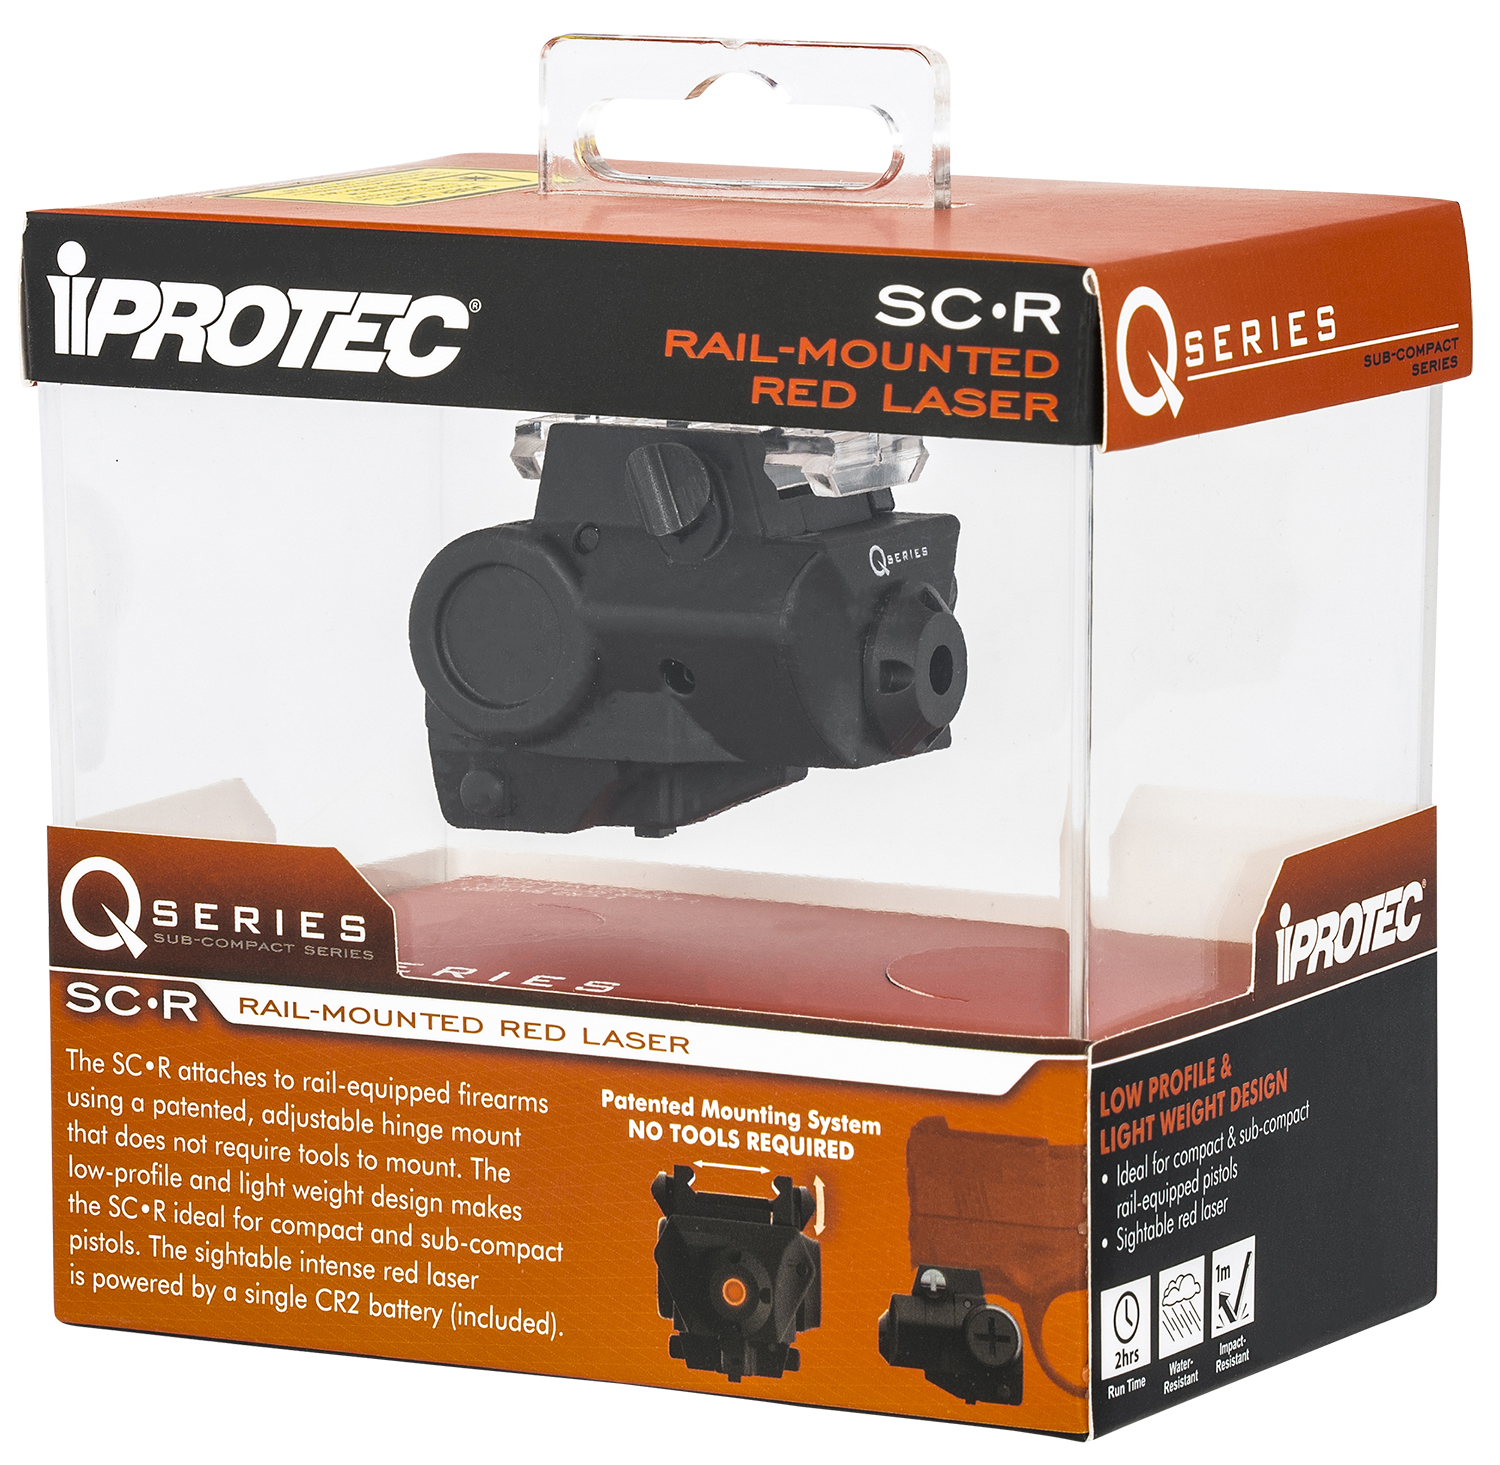 iProtec 6116 Q-Series SC-R 5mW Red Laser with 635nM Wavelength & Black Finish for Rail-Equipped Compact, Subcompact Pistols